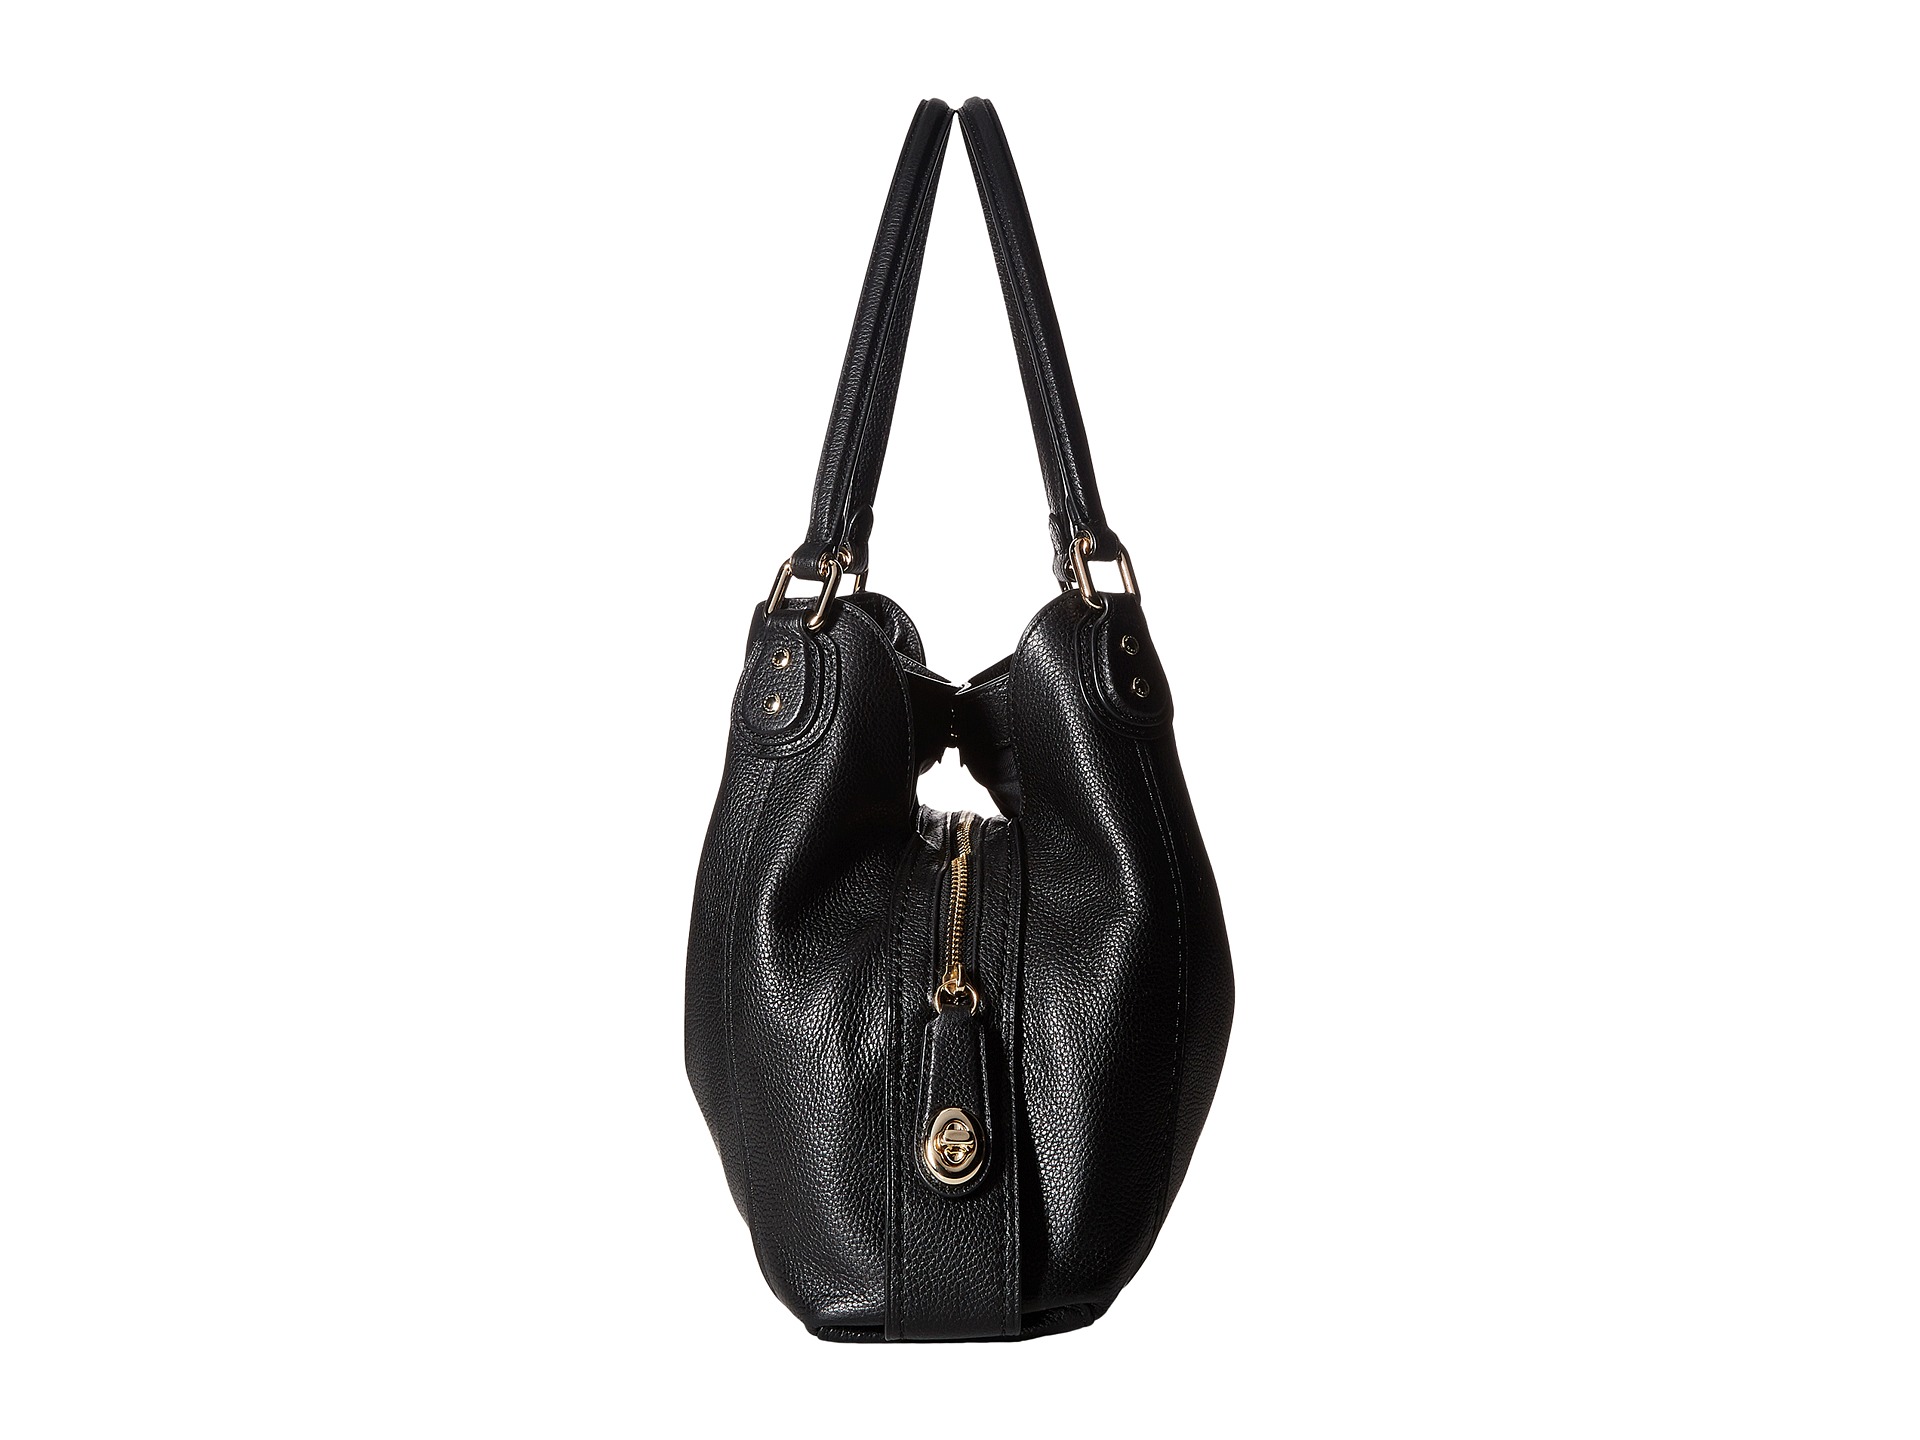 COACH Pebbled Leather Edie 31 Shoulder Bag at Zappos.com